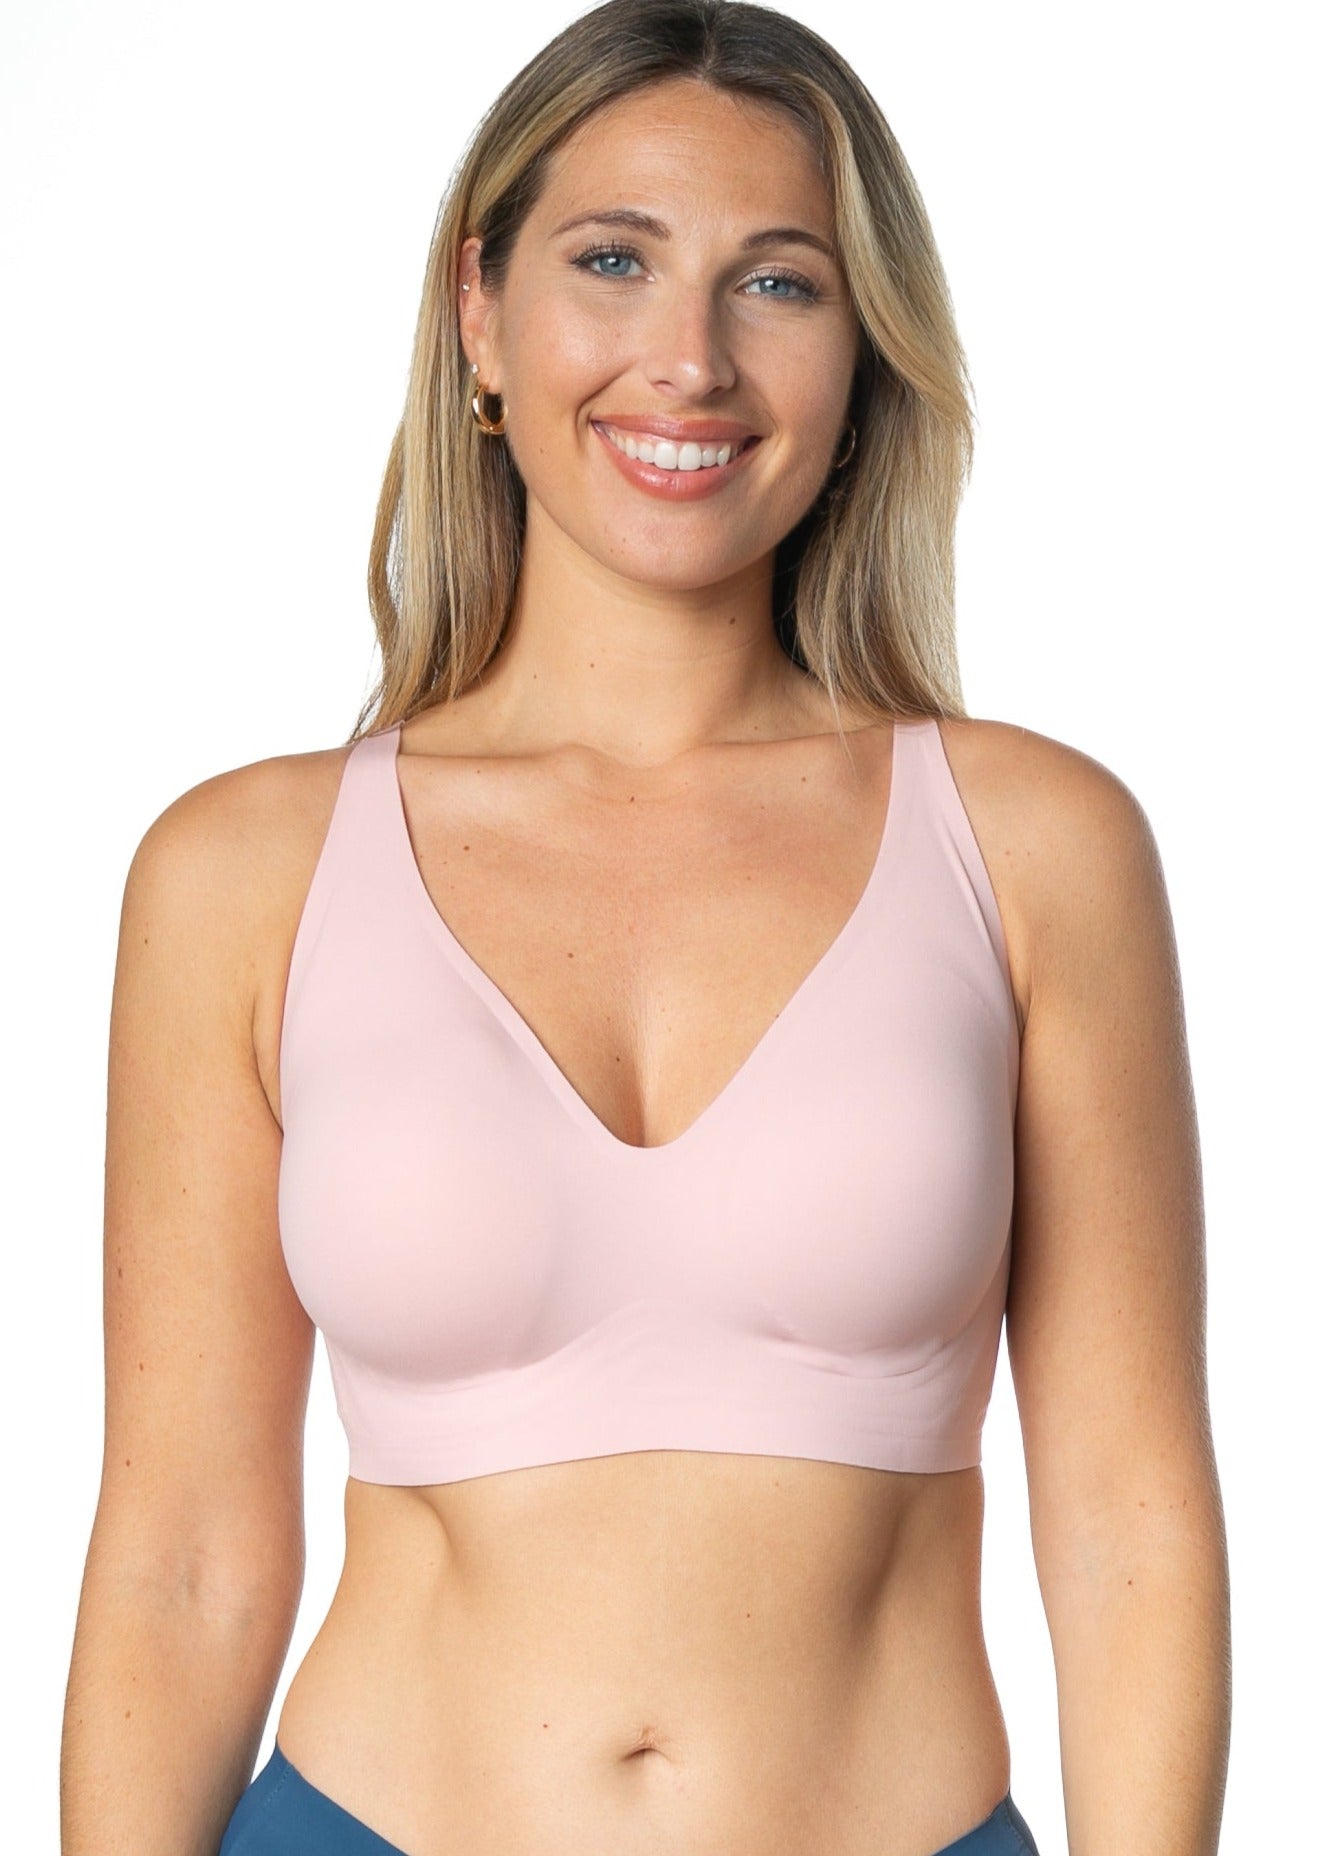 Wholesale bra hook and eye closure For All Your Intimate Needs 